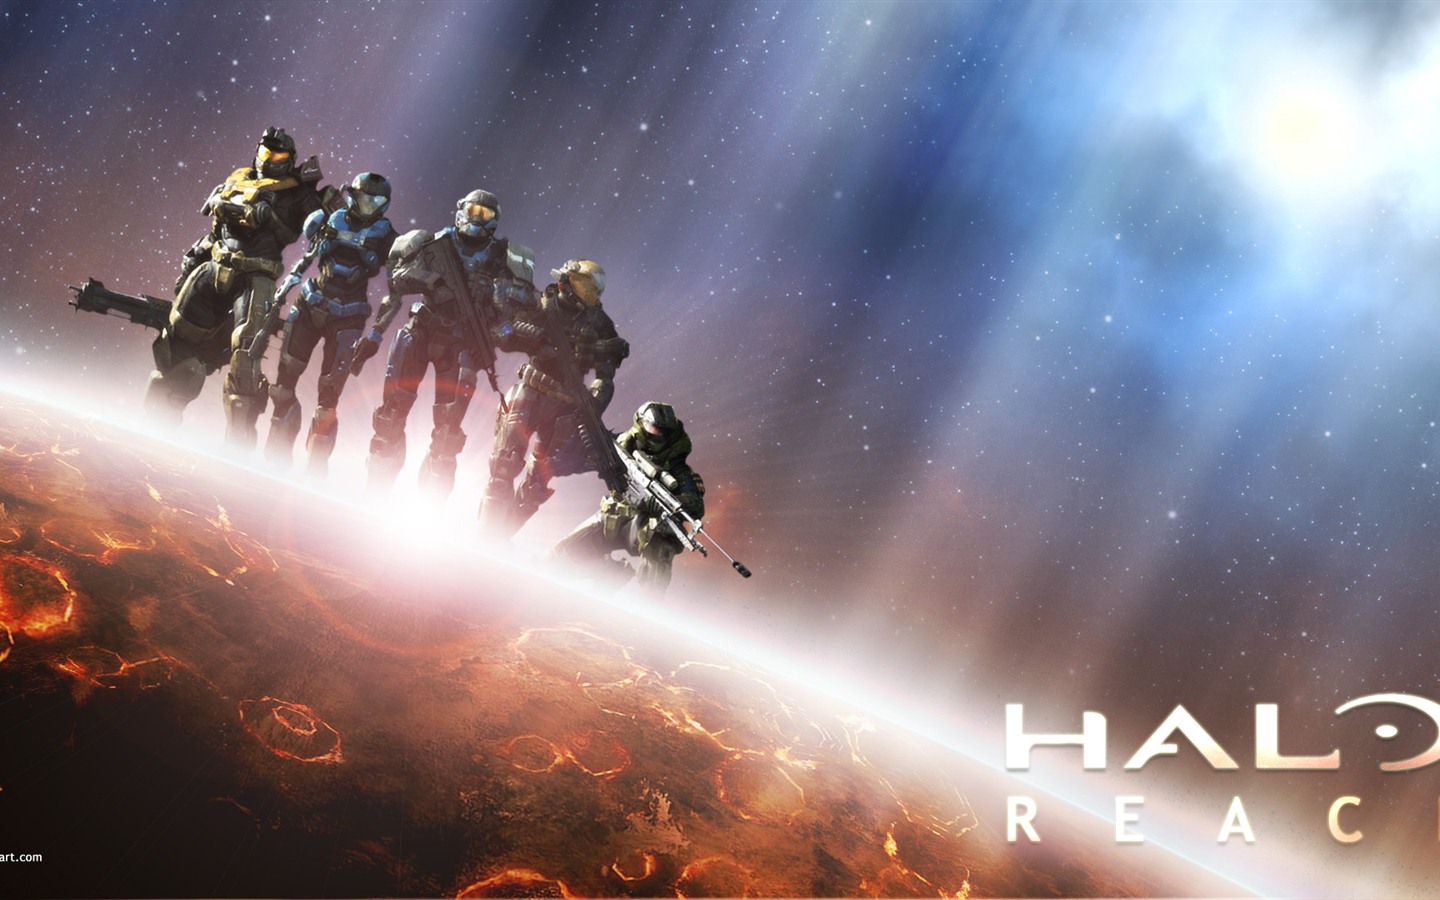 Halo game HD wallpapers #18 - 1440x900